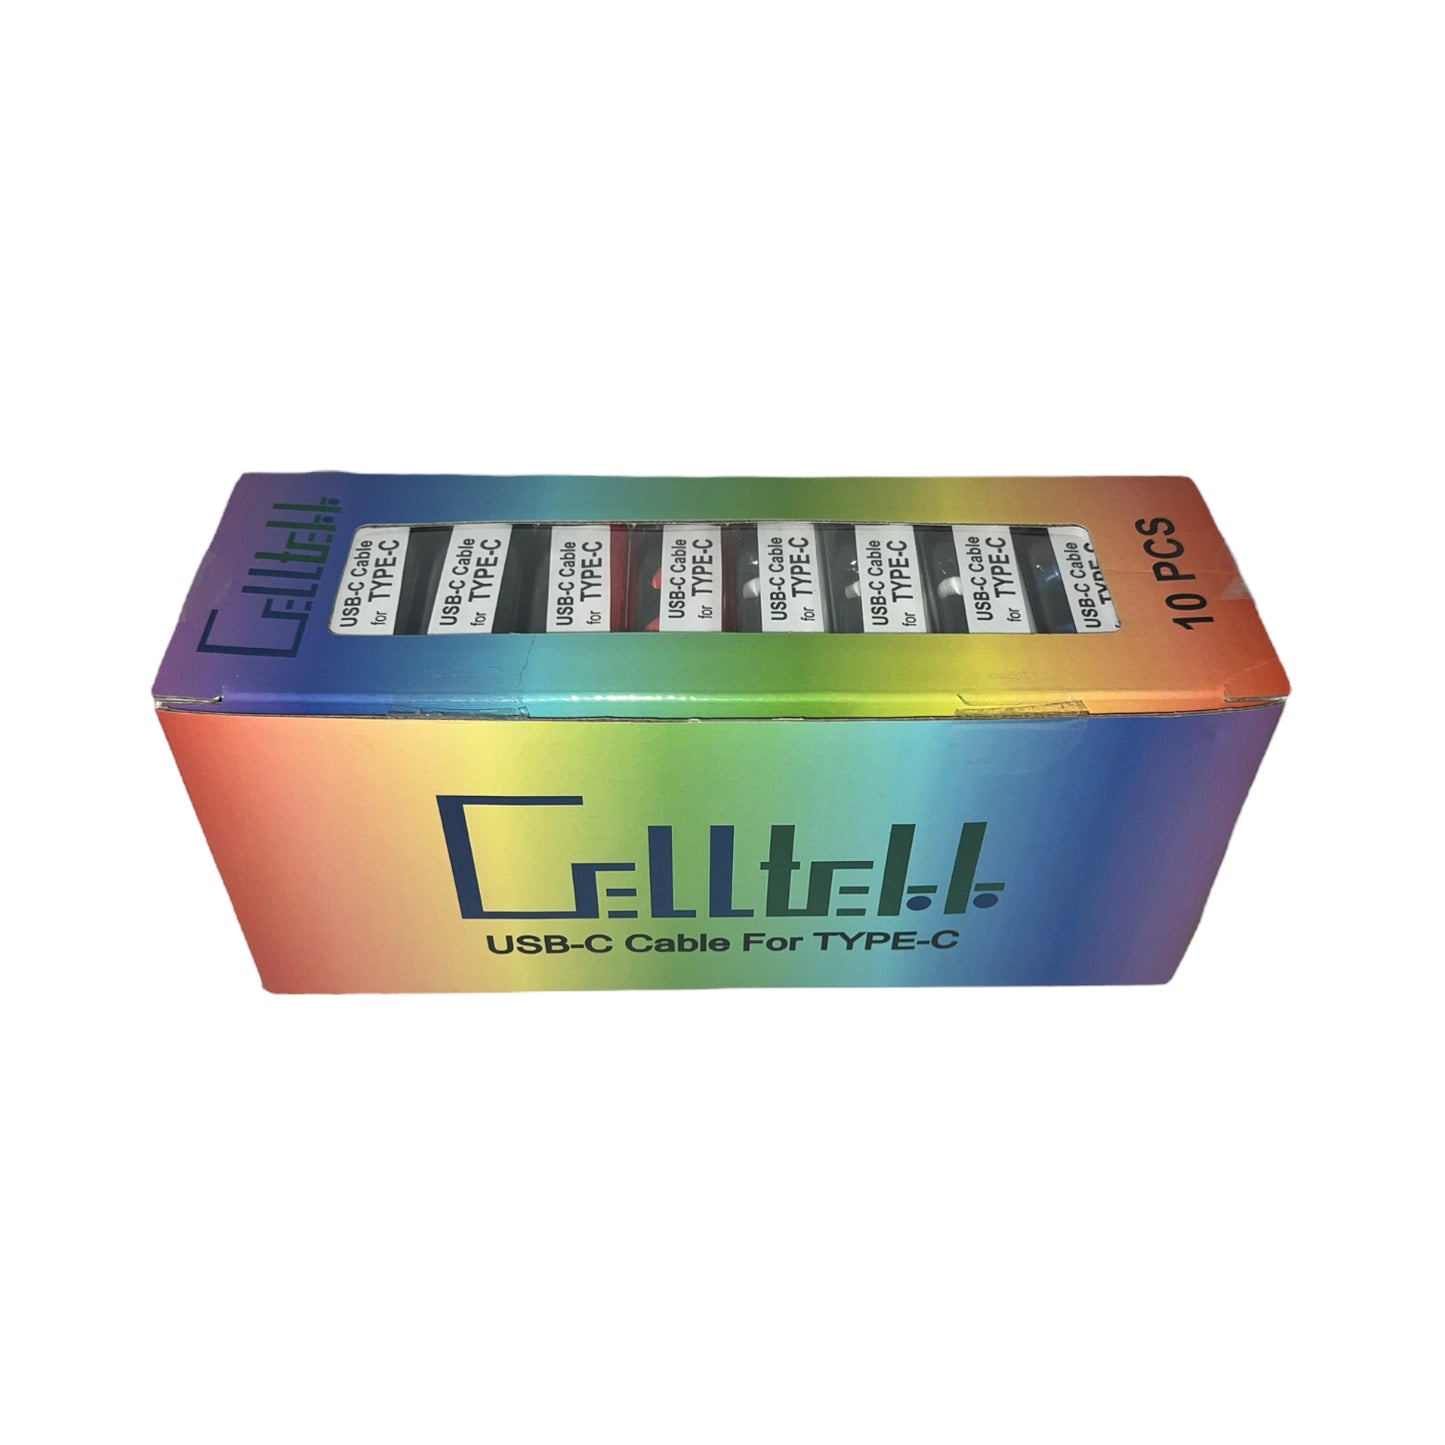 CellTell USB-C Cables 10ct Display